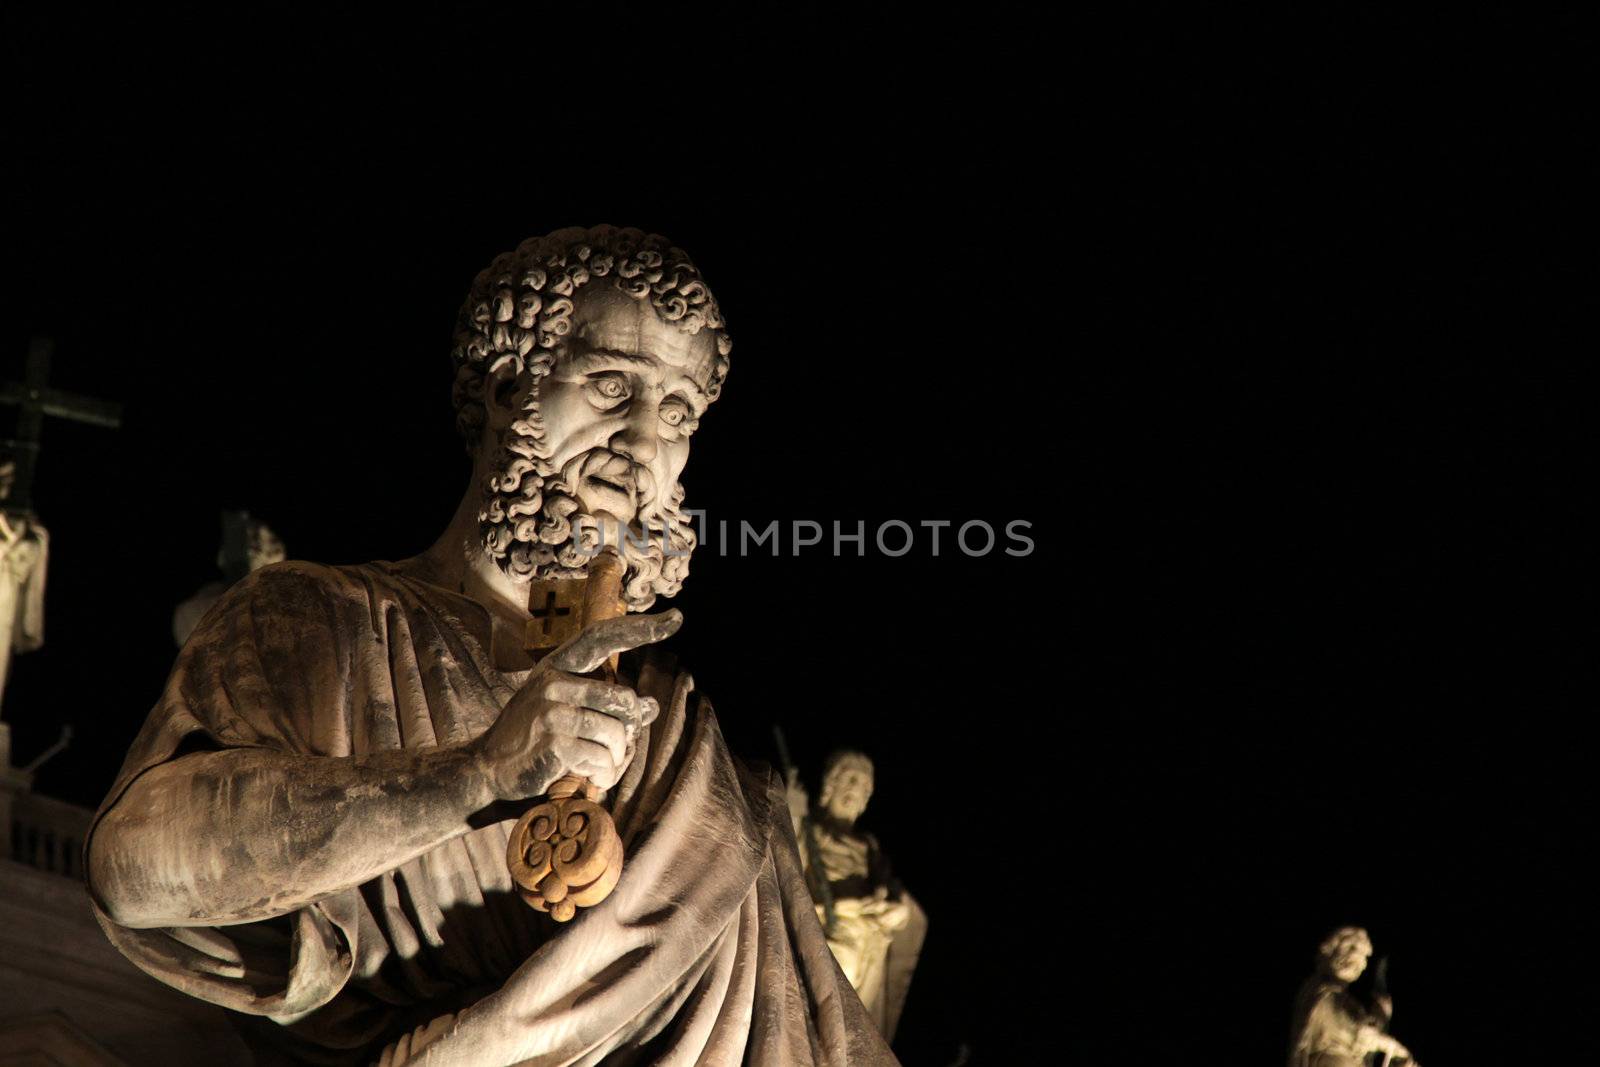 Statue of St. Peter at Night
 by ca2hill